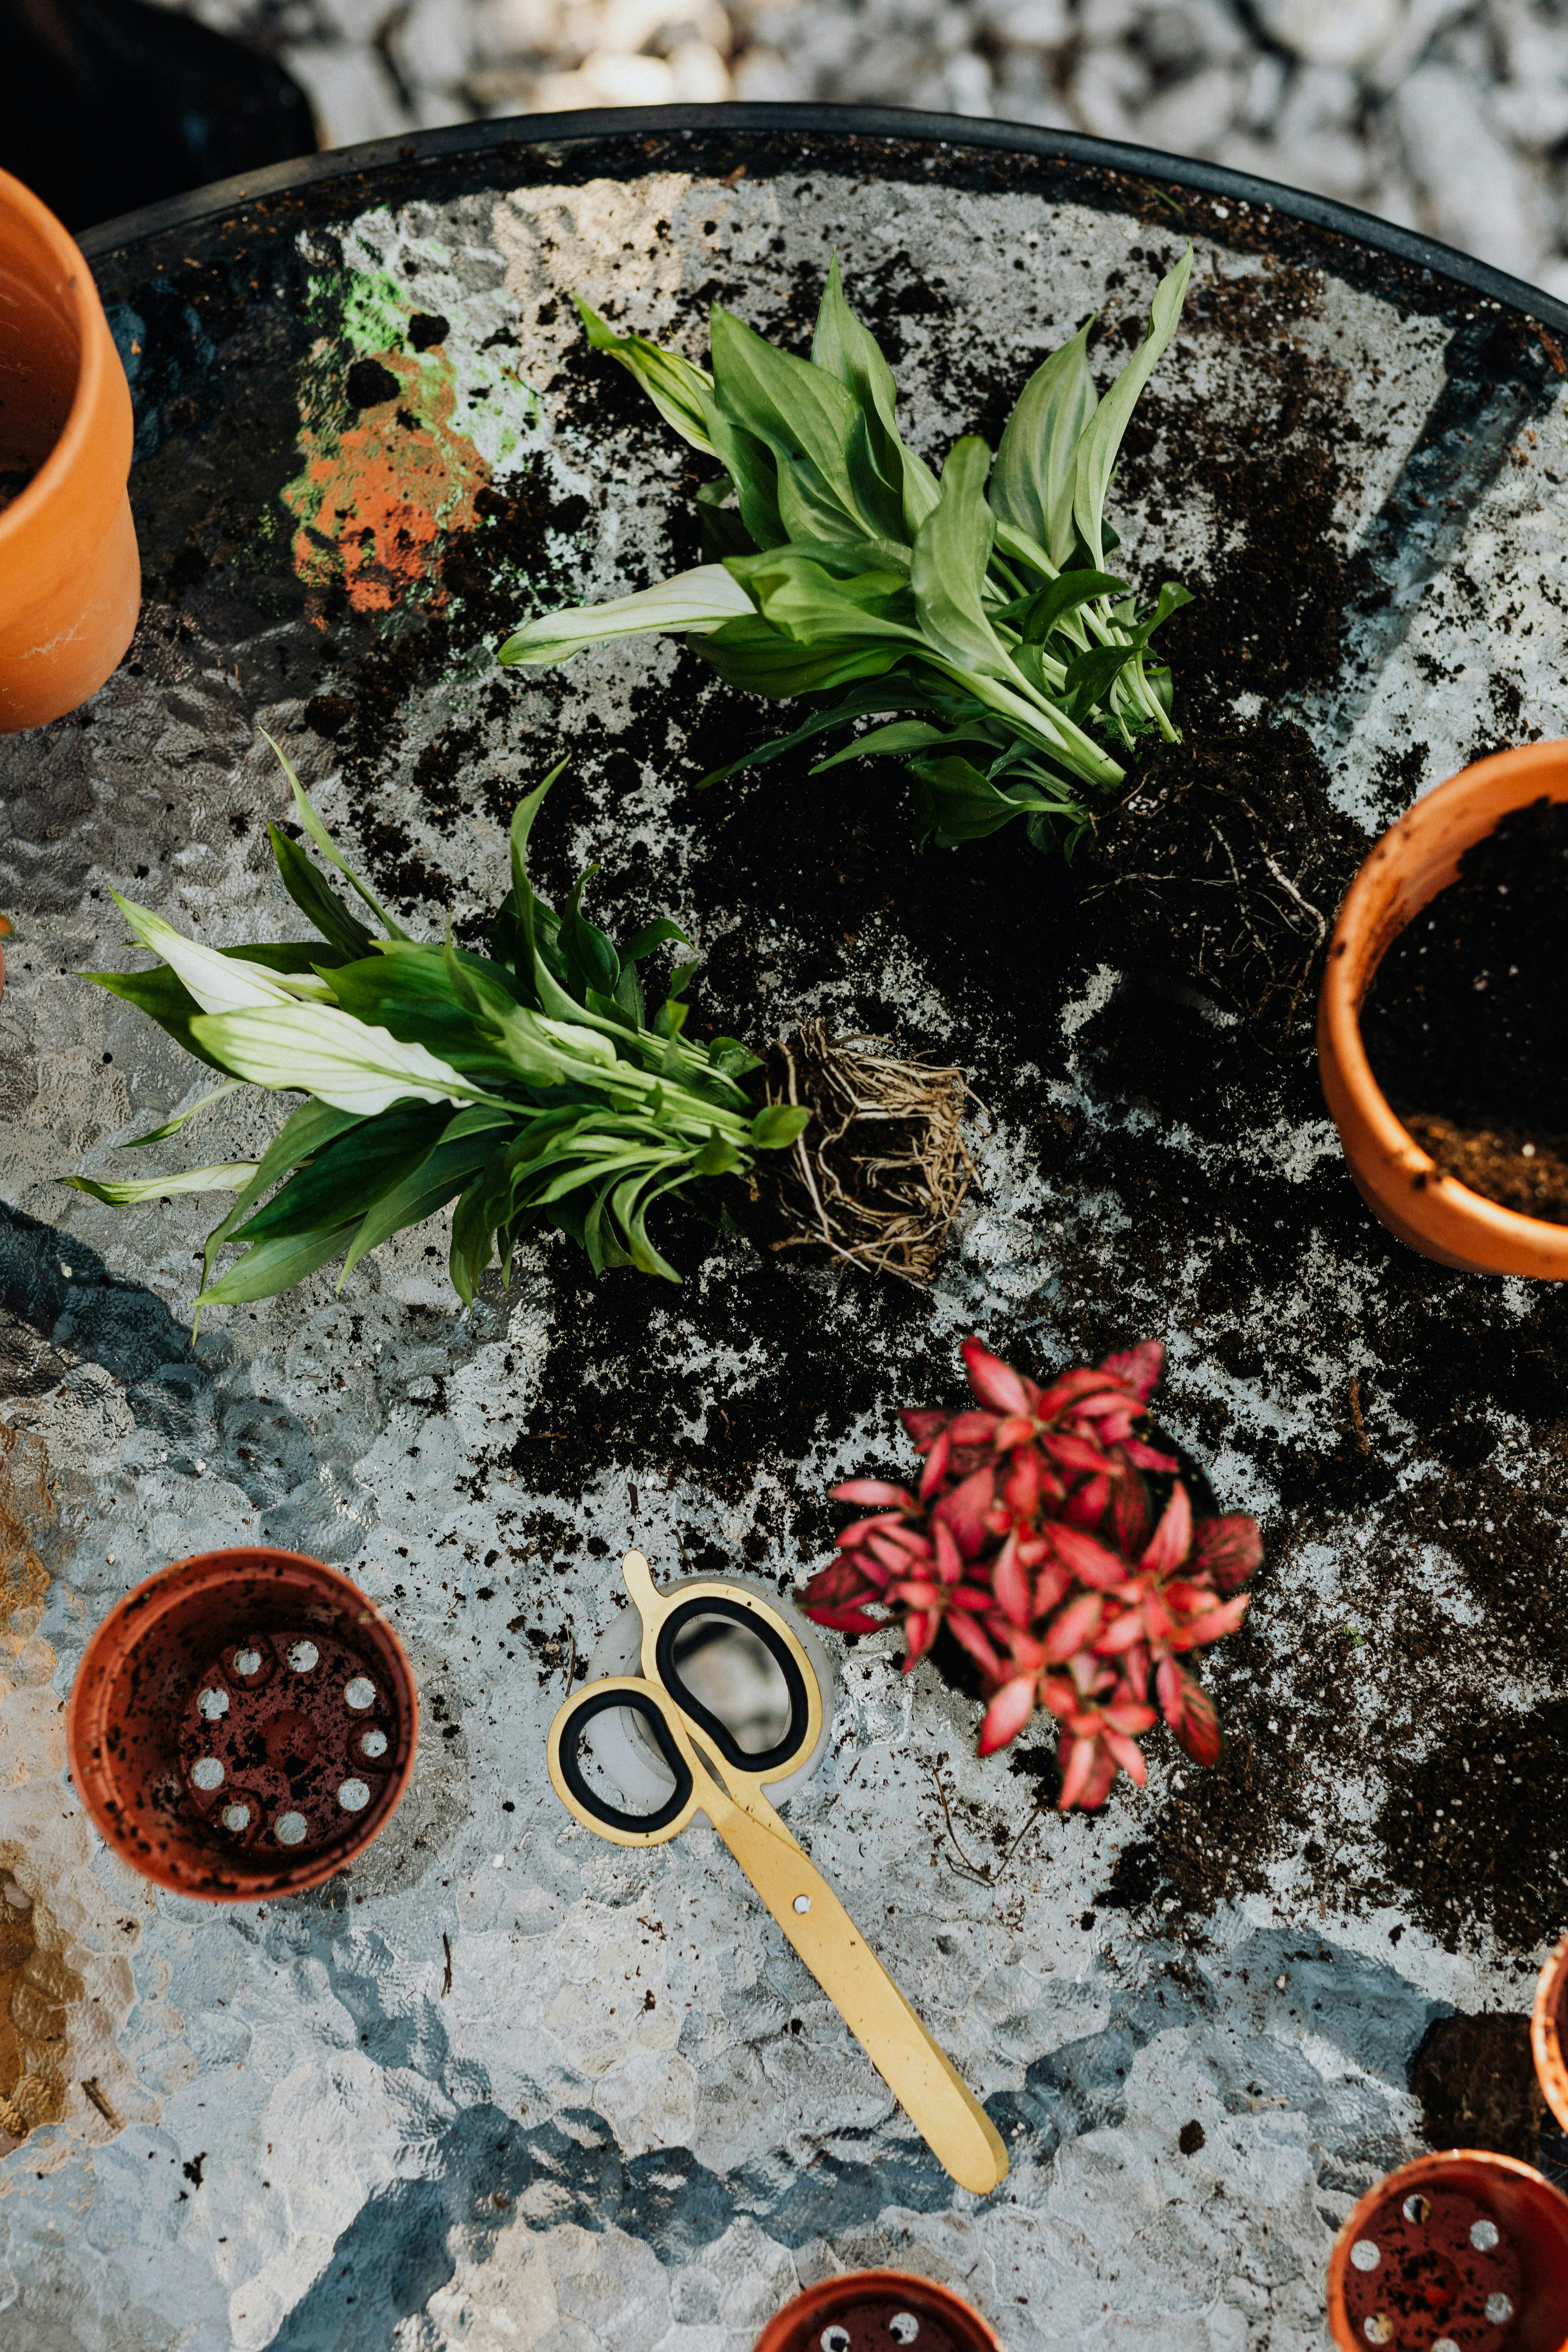 Plants uprooted from pots with soil lying around them | Source: Pexels